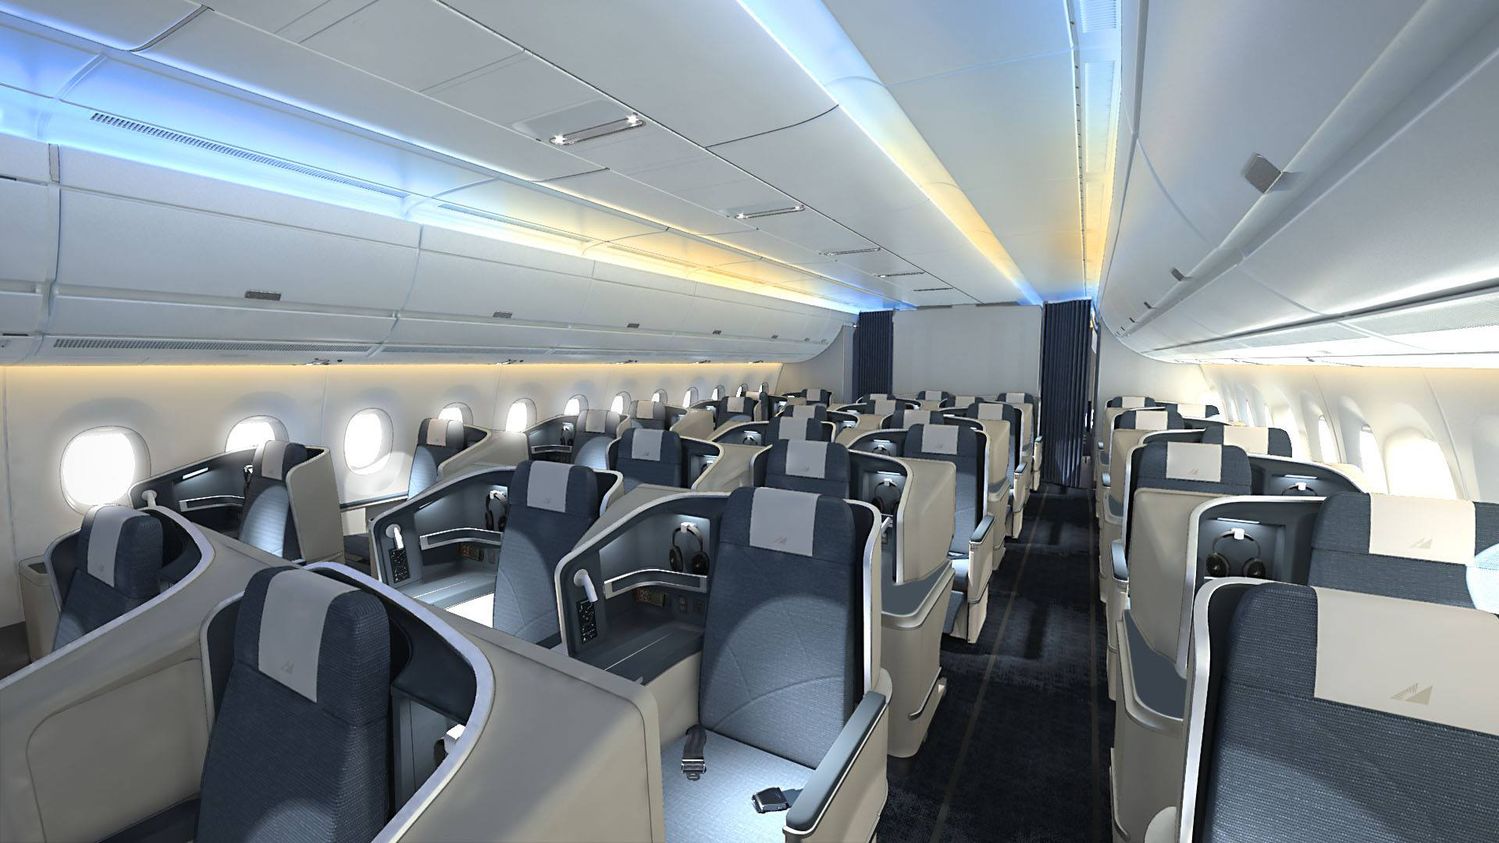 Philippine Airlines teases “improved” business class on its new A350s ...